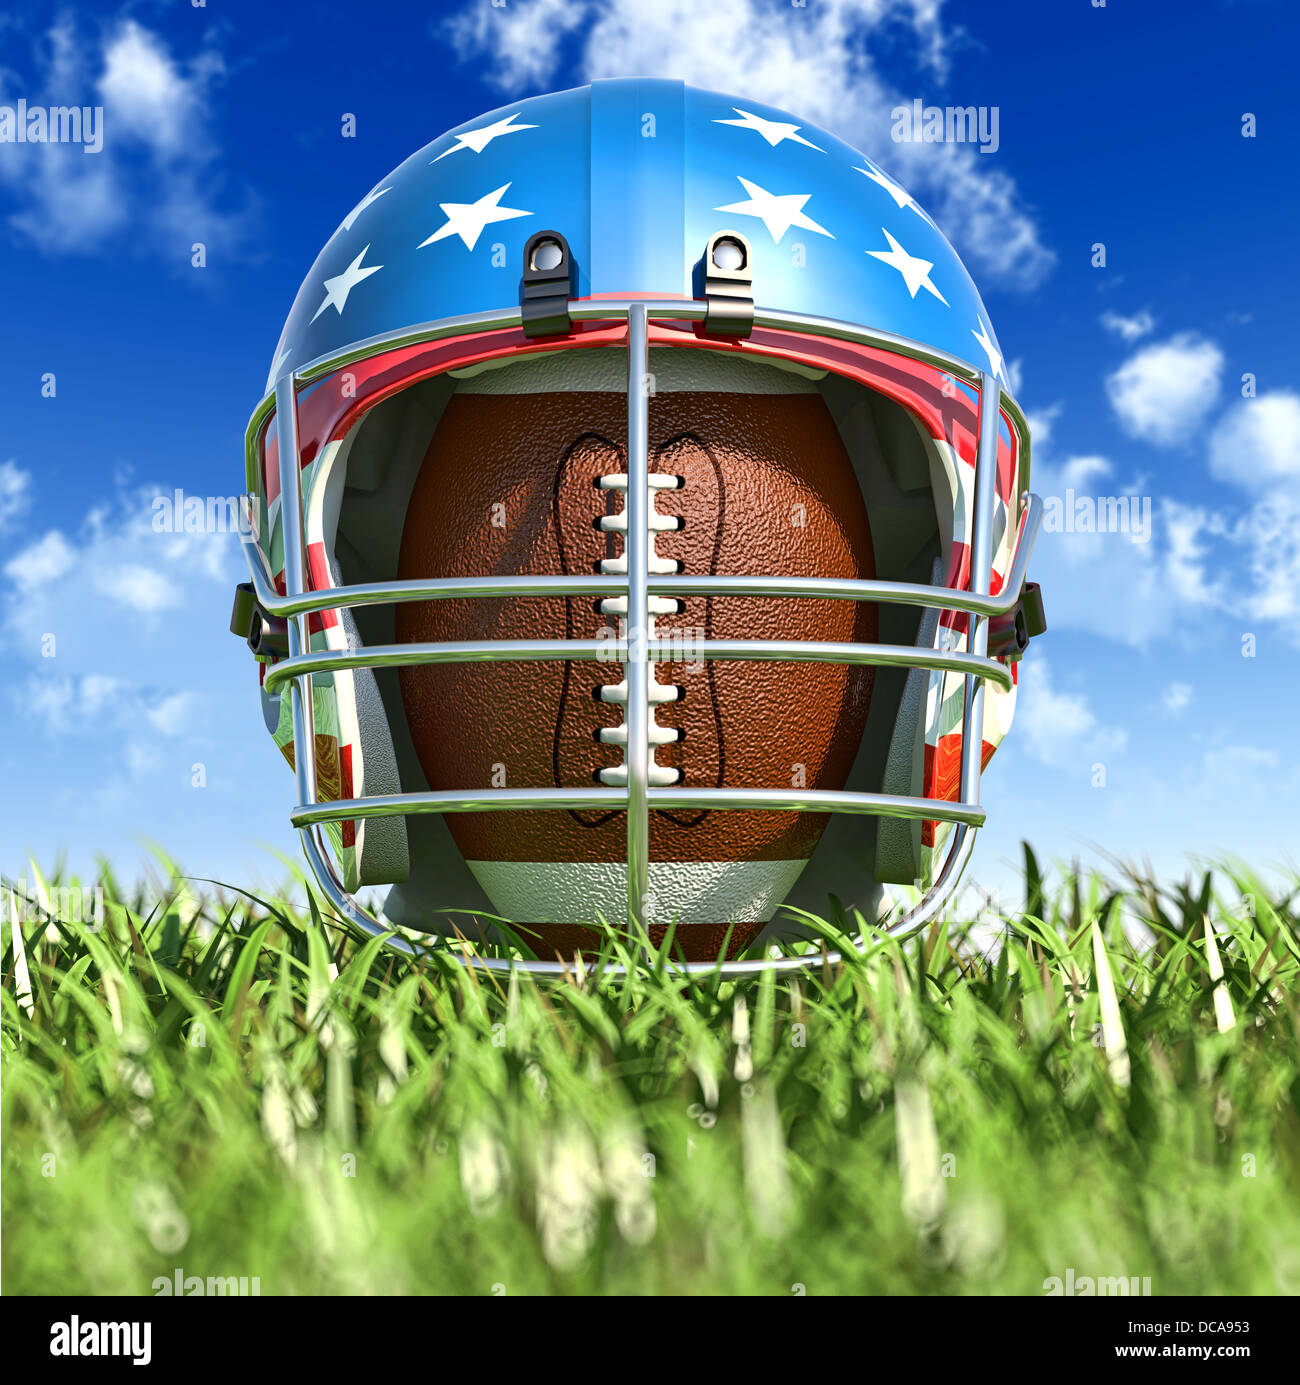 American football helmet over the oval ball, on the grass. Frontal Close up view, from the ground level. With sky. Stock Photo